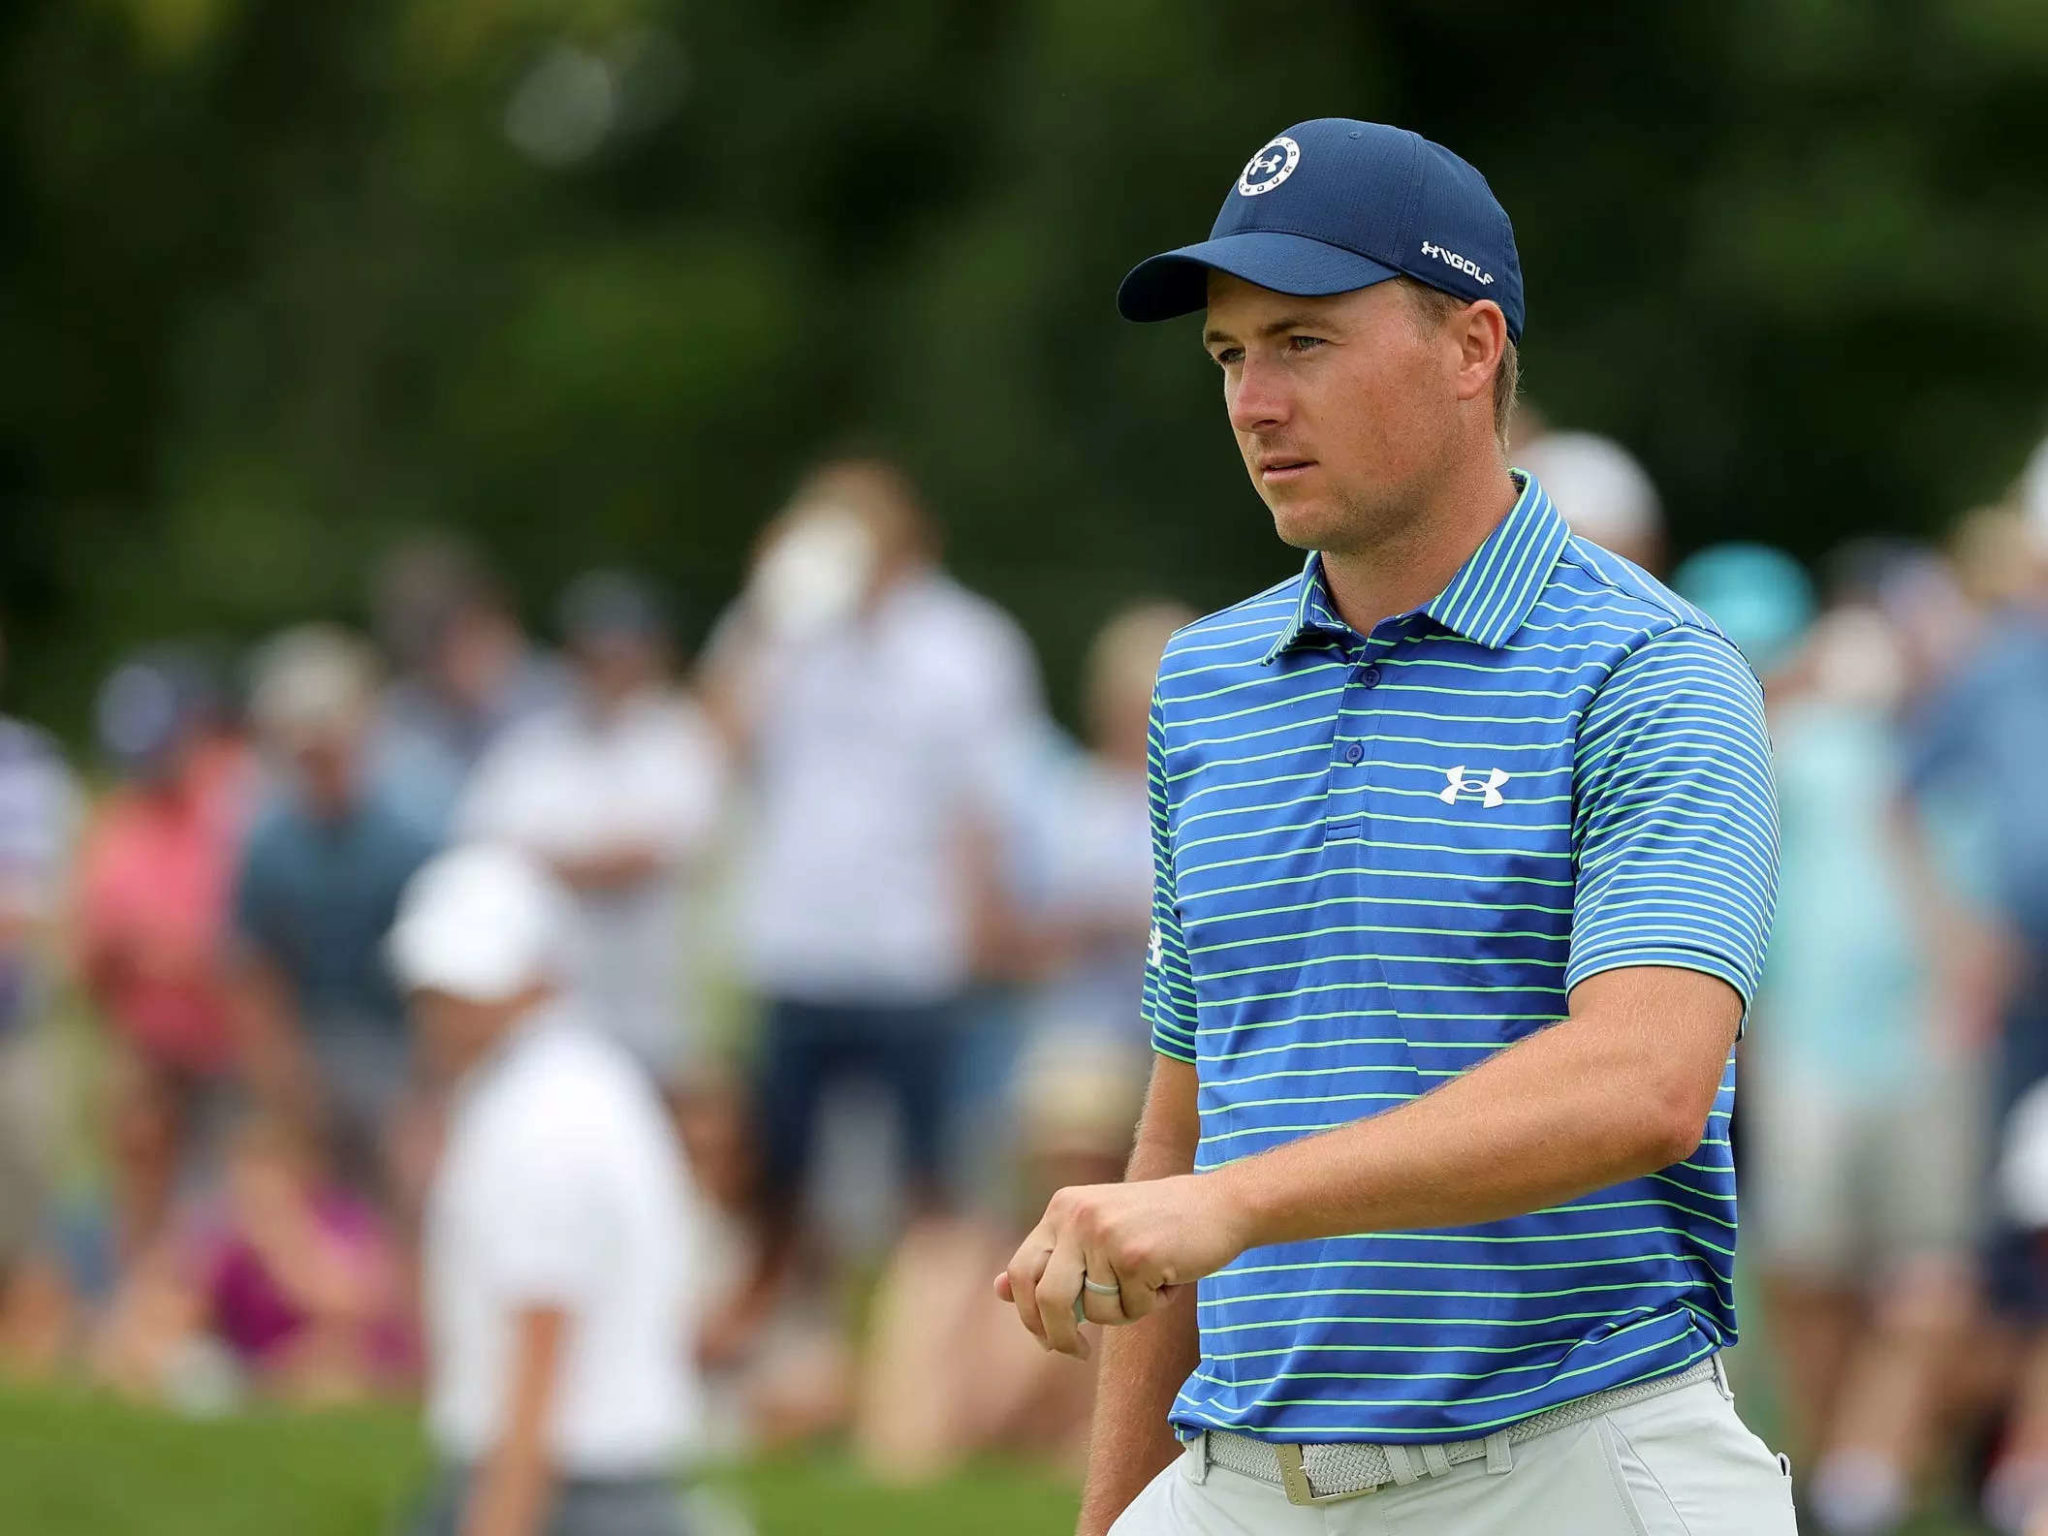 Jordan Spieth sank a shot from 82 yards after telling his caddie that’s what he was going to do